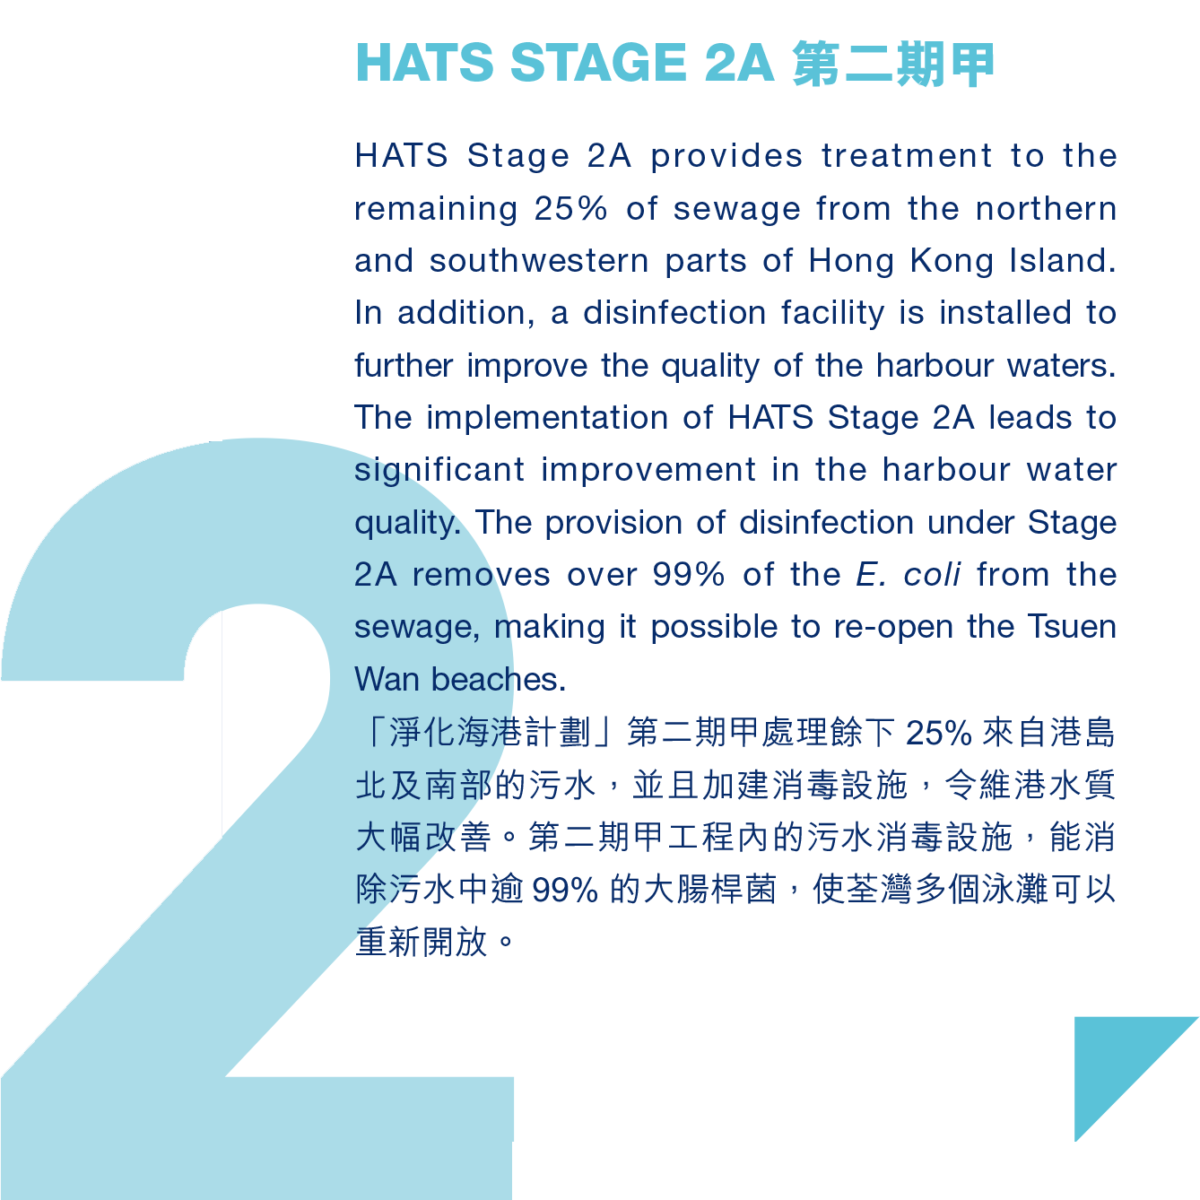 HATS Stage 2A provides treatment to the remaining 25% of sewage from the northern and southwestern parts of Hong Kong Island. In addition, a disinfection facility is installed to further improve the quality of the harbour waters. The implementation of HATS Stage 2A leads to significant improvement in the harbour water quality. The provision of disinfection under Stage 2A removes over 99% of the E. coli from the sewage, making it possible to re-open the Tsuen Wan beaches.